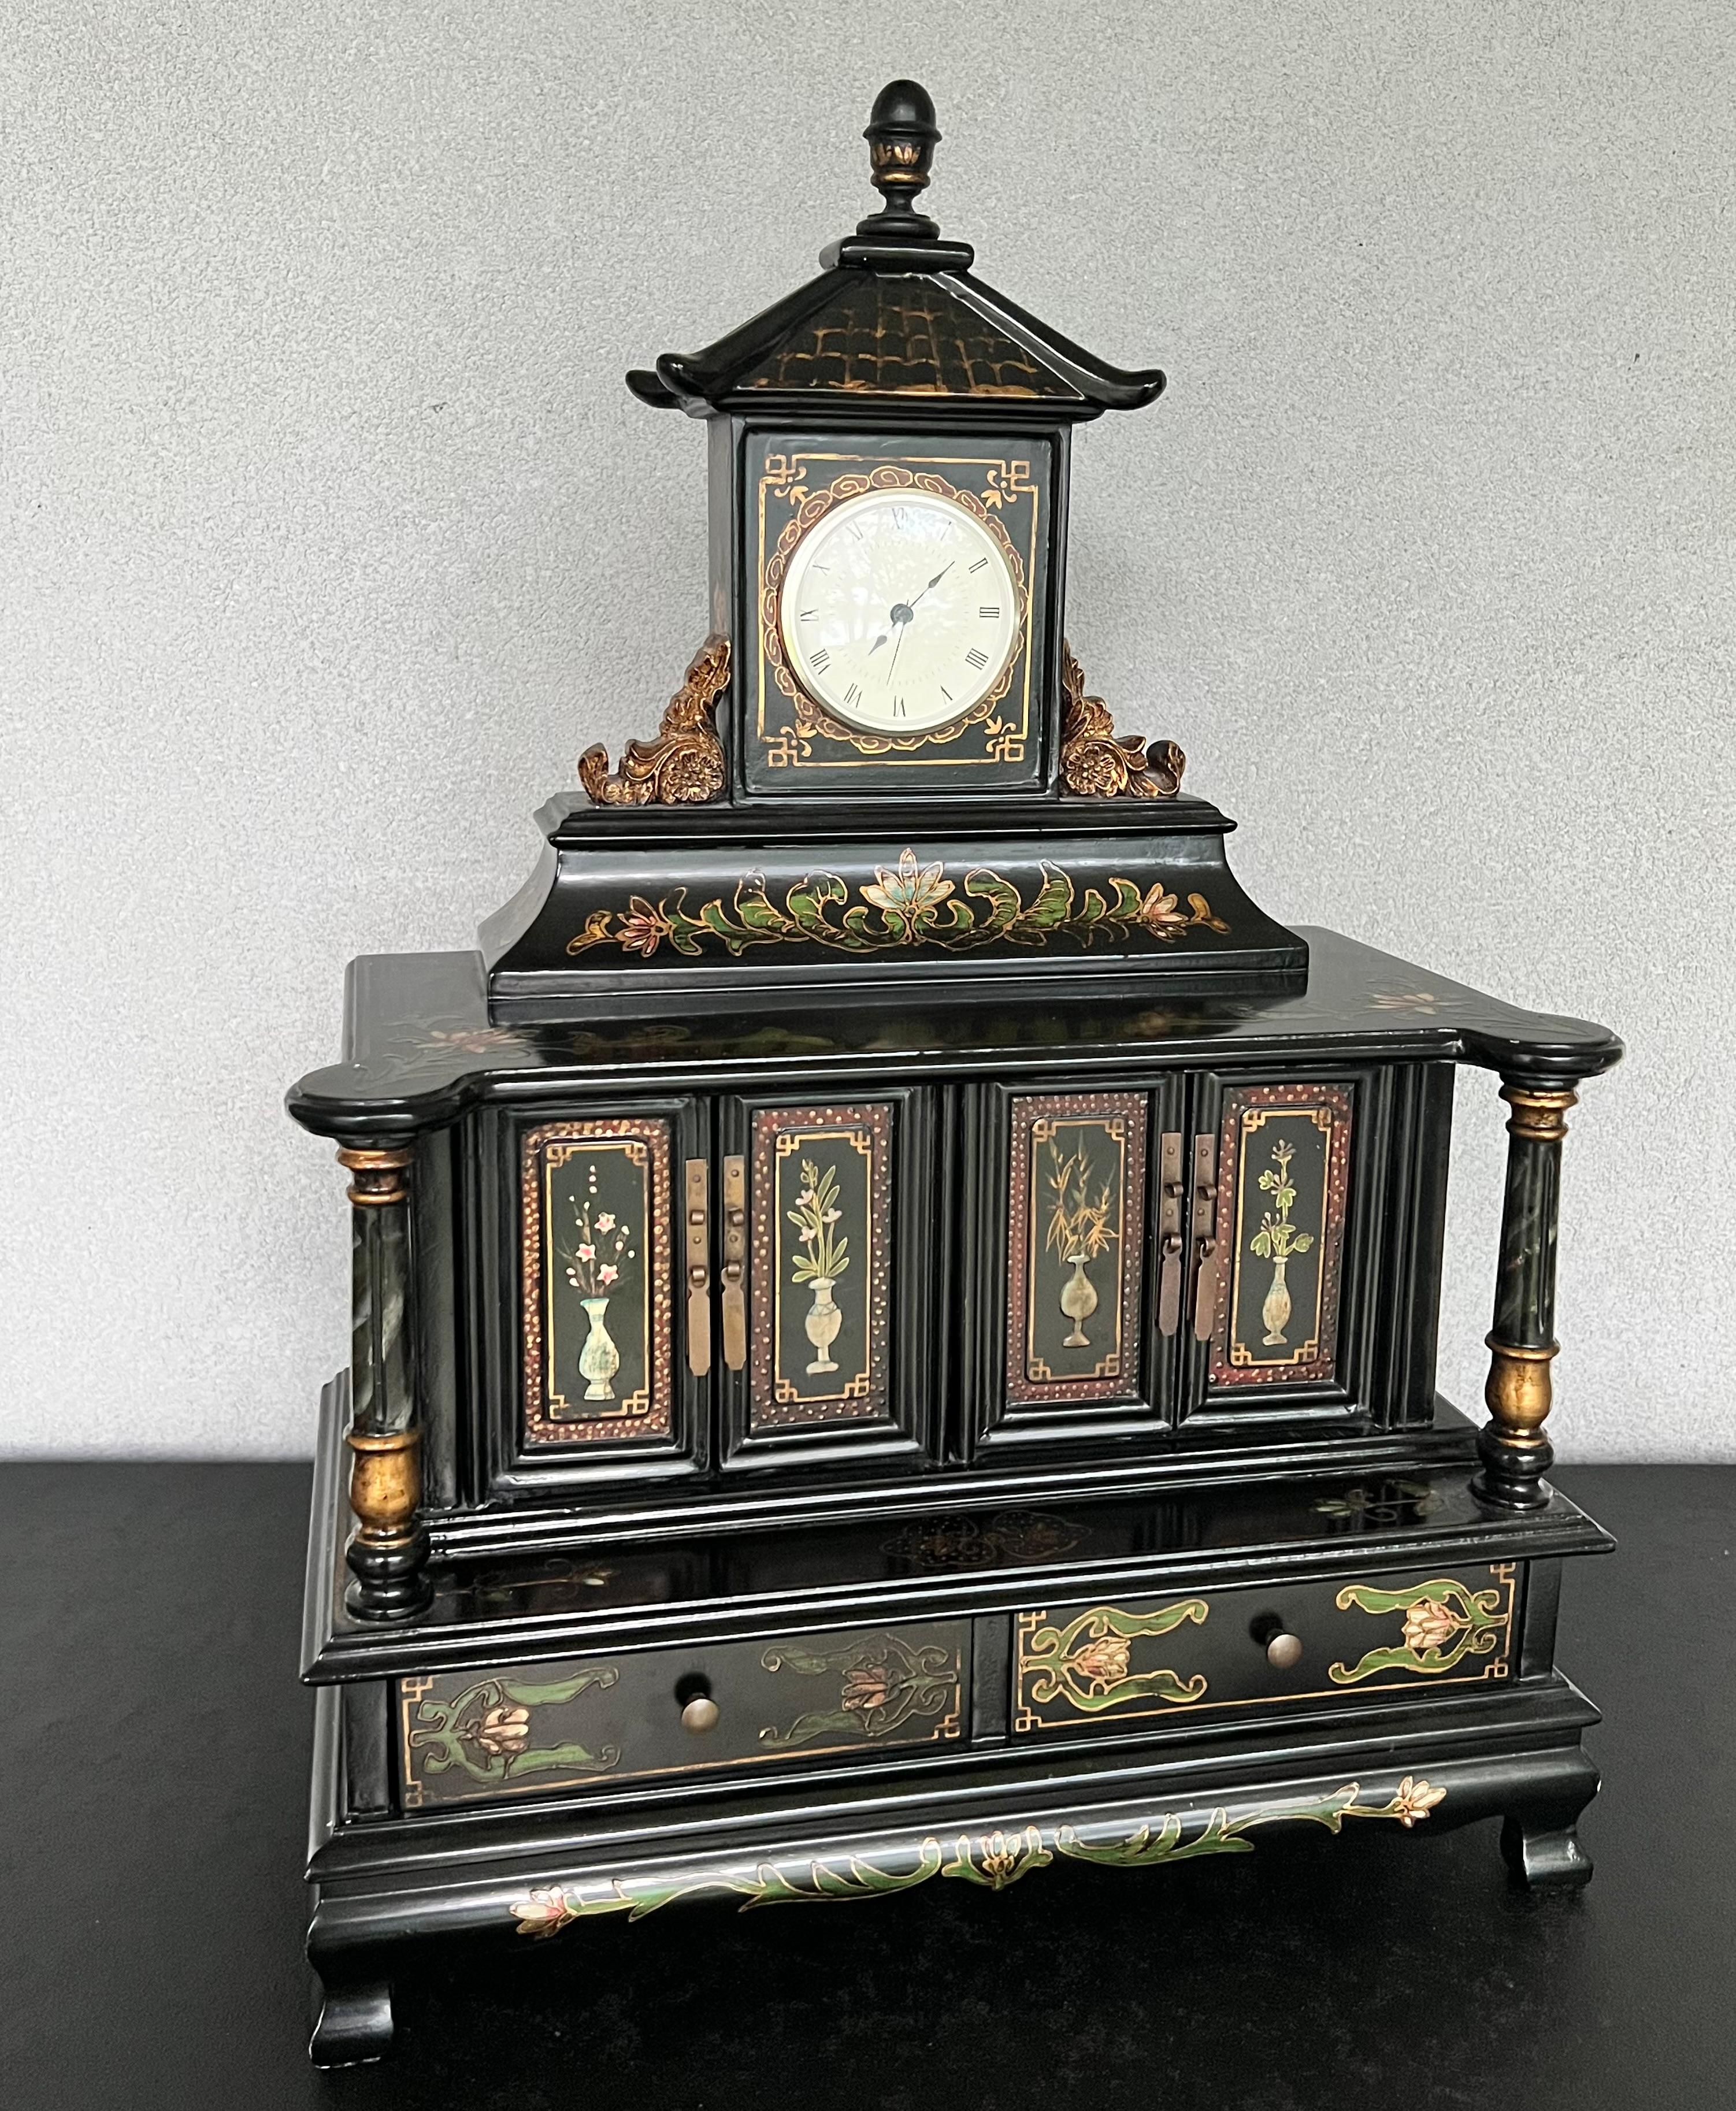 Stunning Jewelry box with a pagoda style beautifully decorated, has a working clock that can be removed with a push through a hole on the back to adjust time or change battery 
This piece is really amazing and would be a statement piece on your